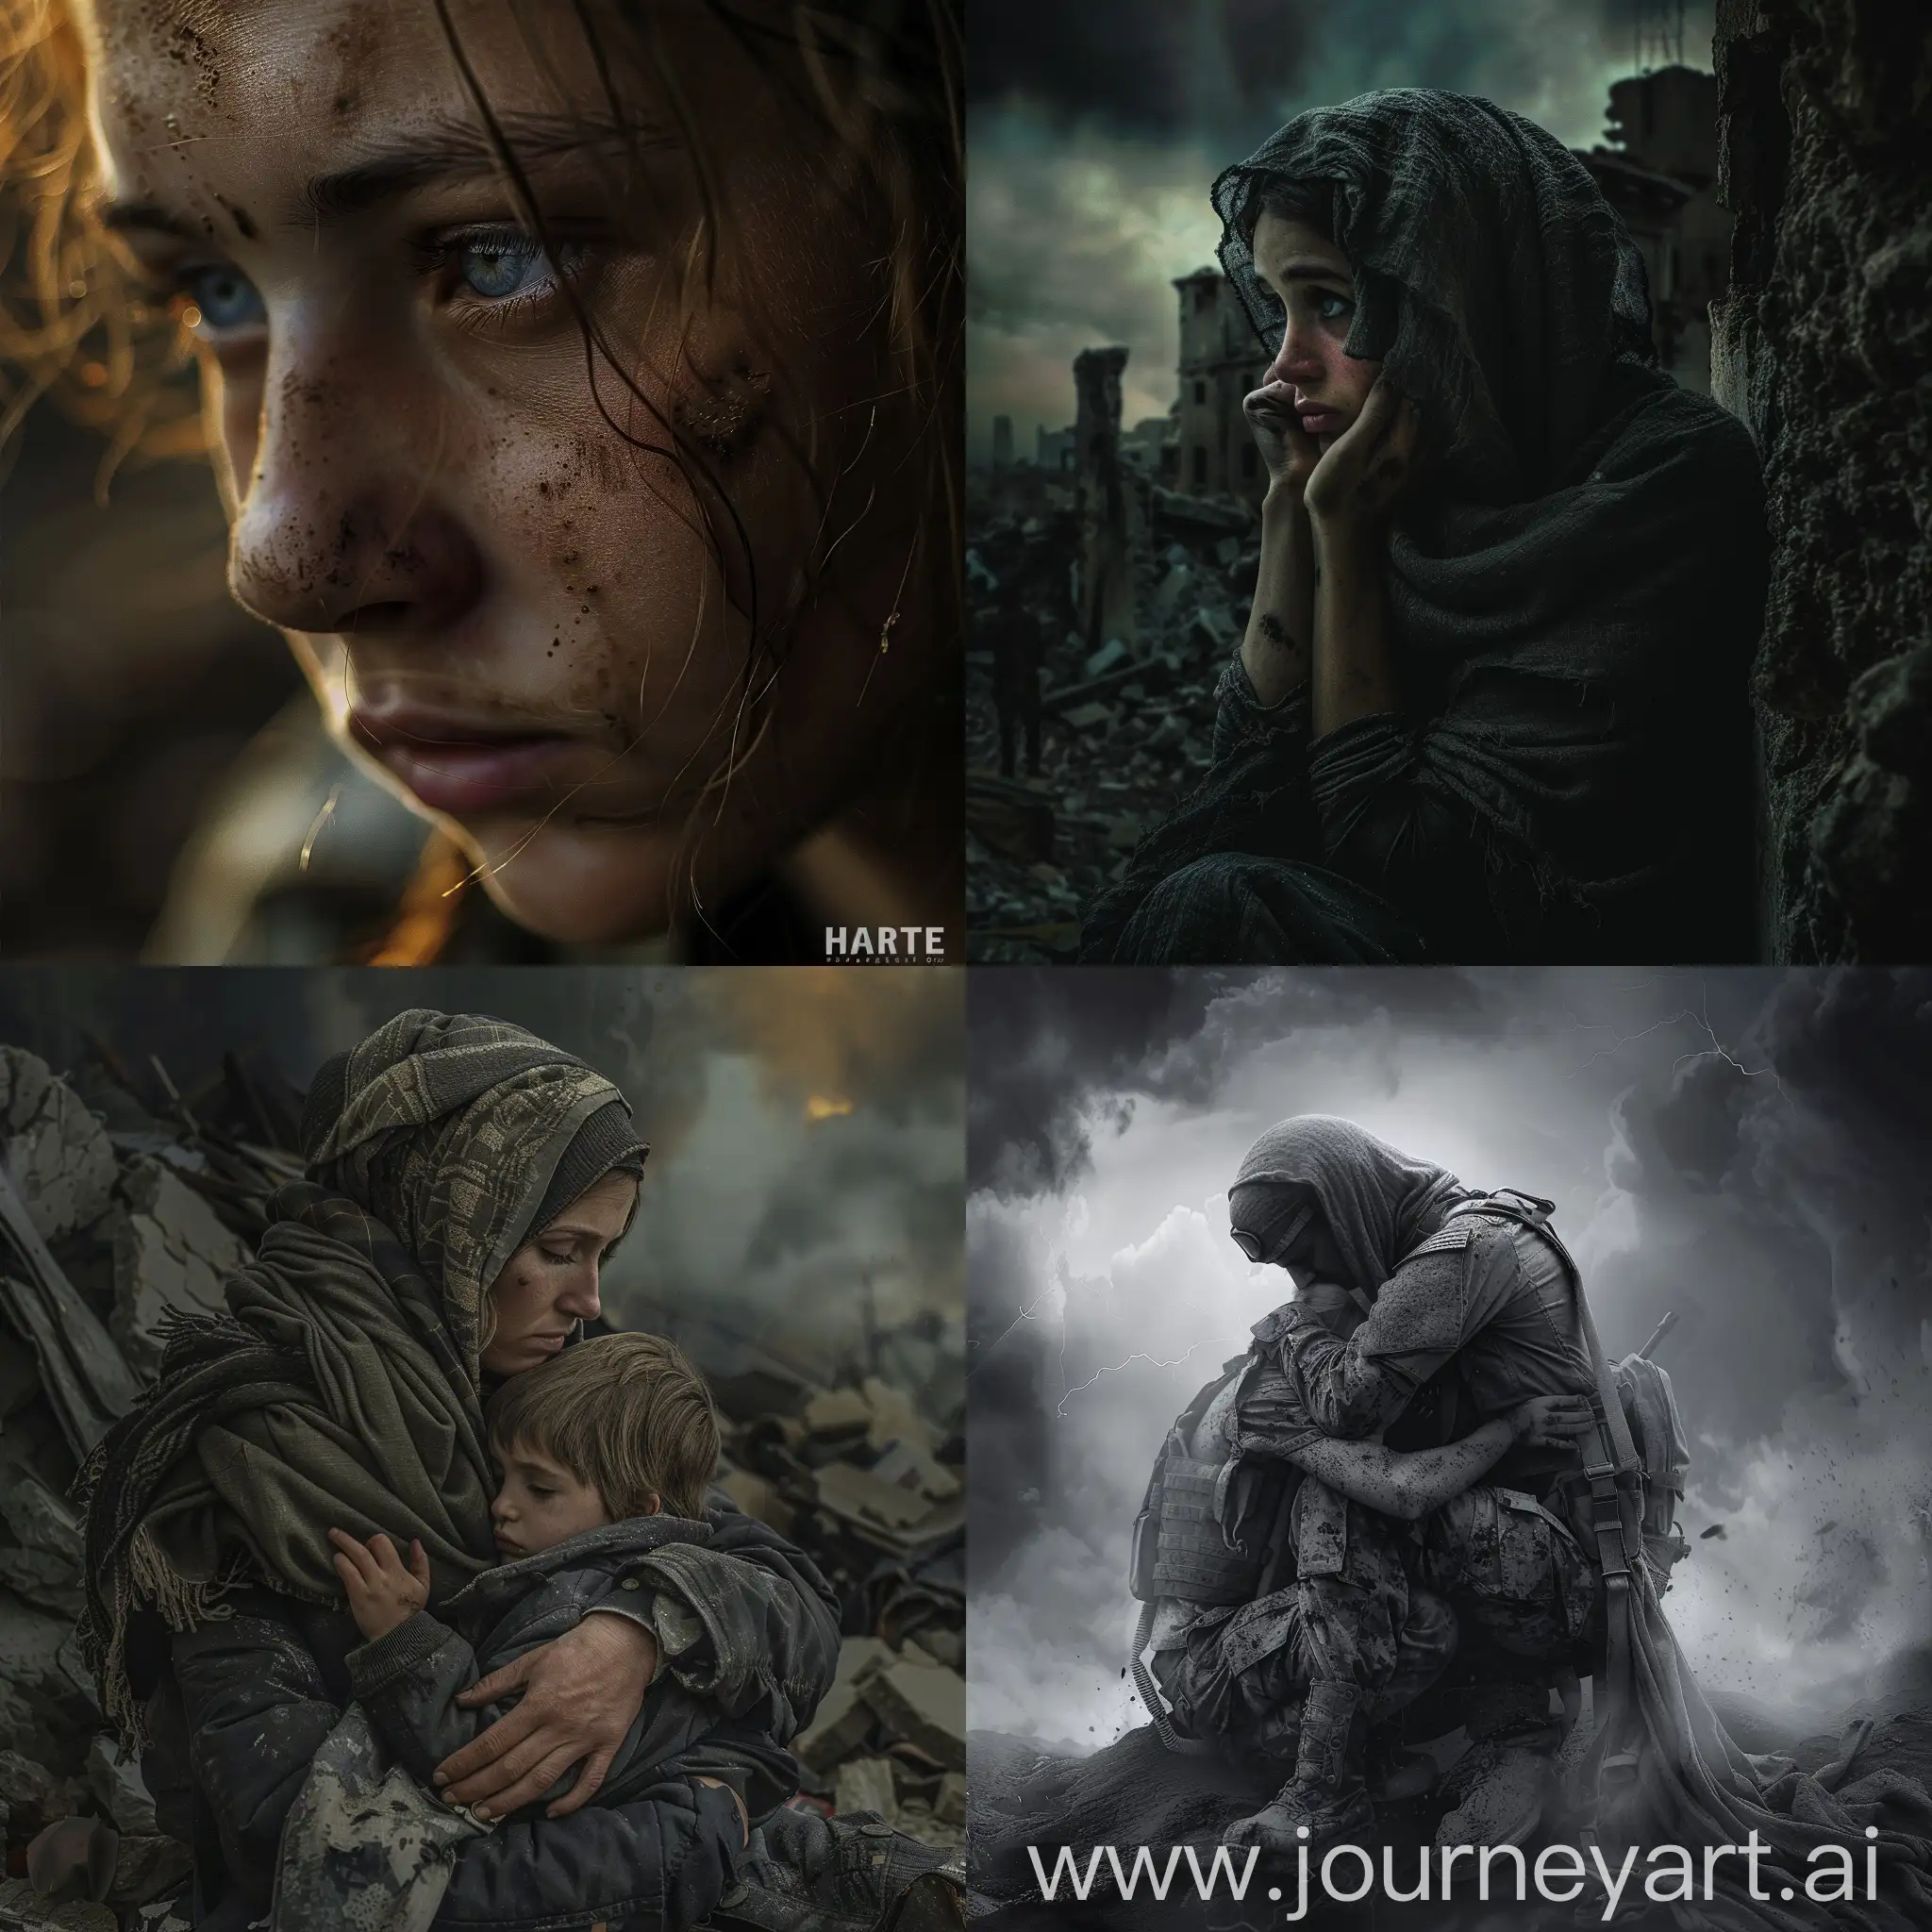 Emotional-War-and-Hope-A-Composition-of-Sorrow-and-Resilience